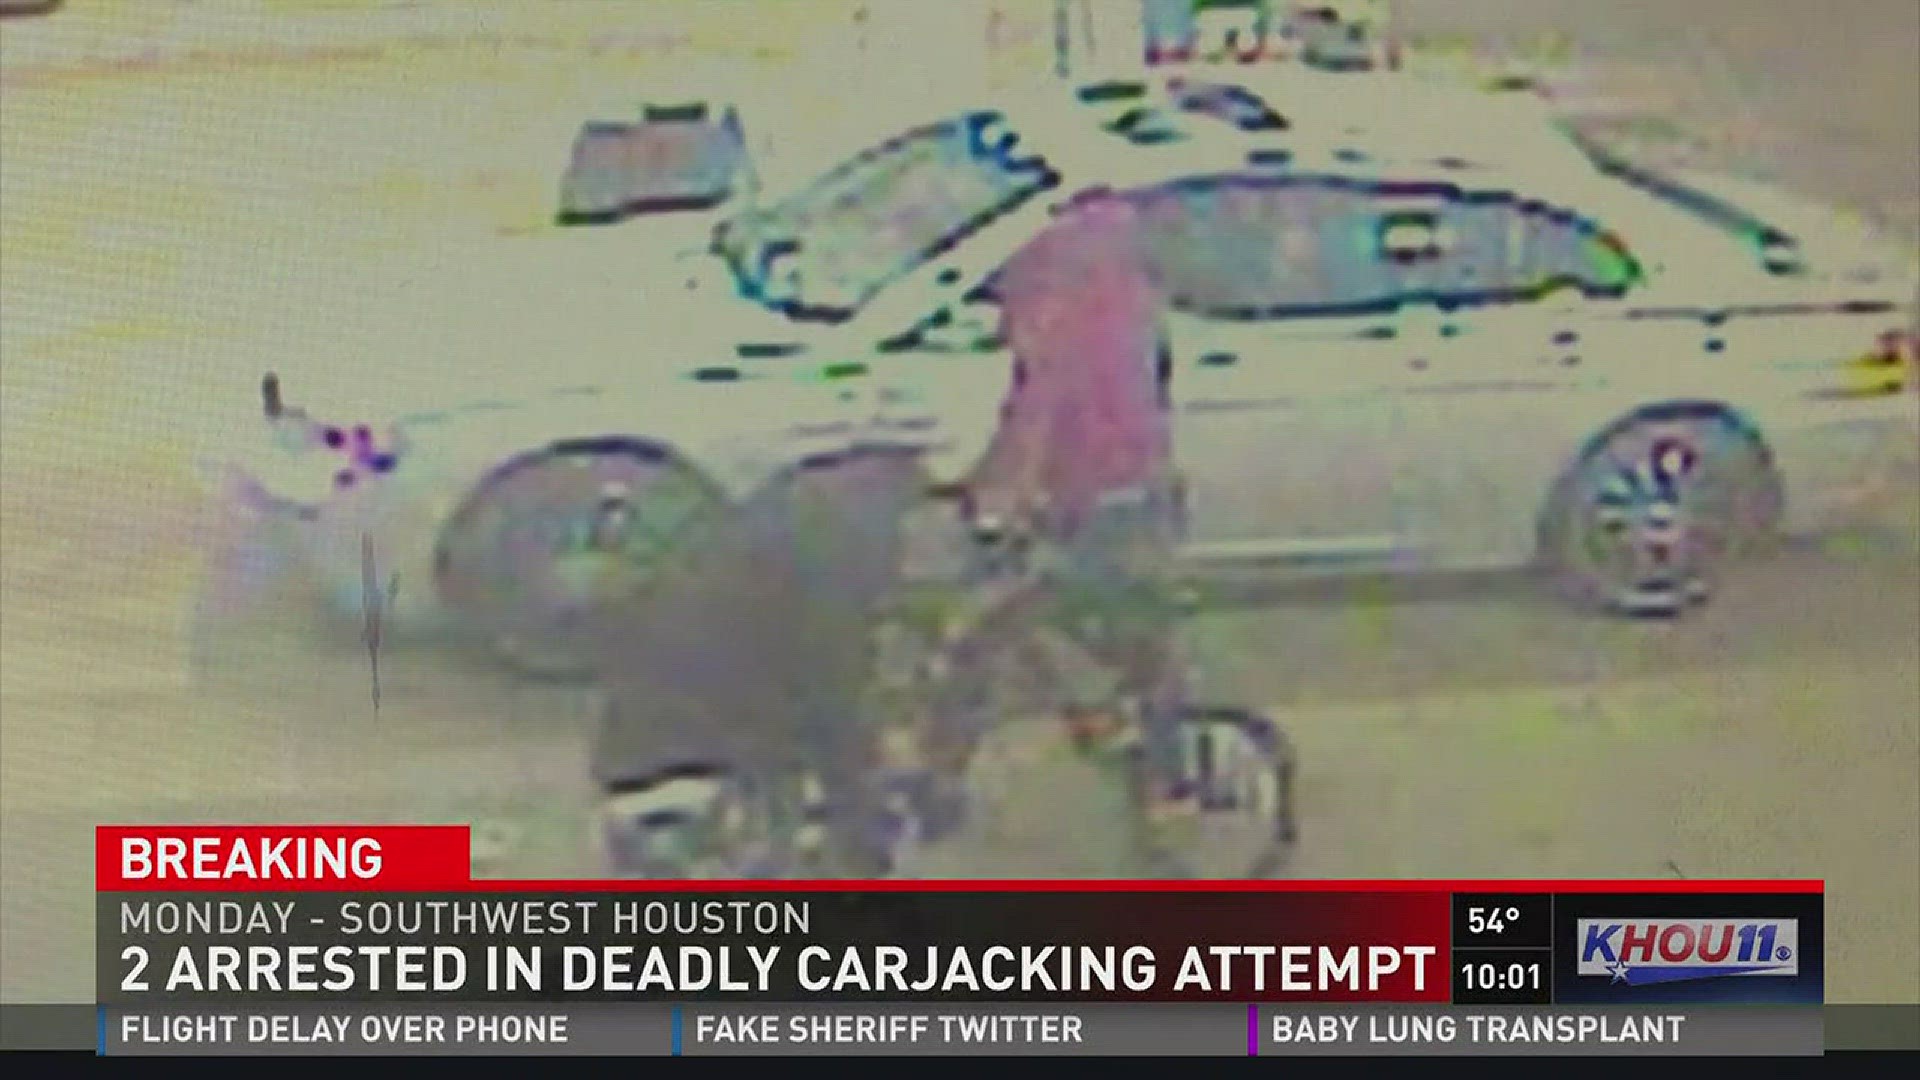 Houston police say two suspects have been arrested in an attempted carjacking and fatal shooting of a woman Monday in southwest Houston.